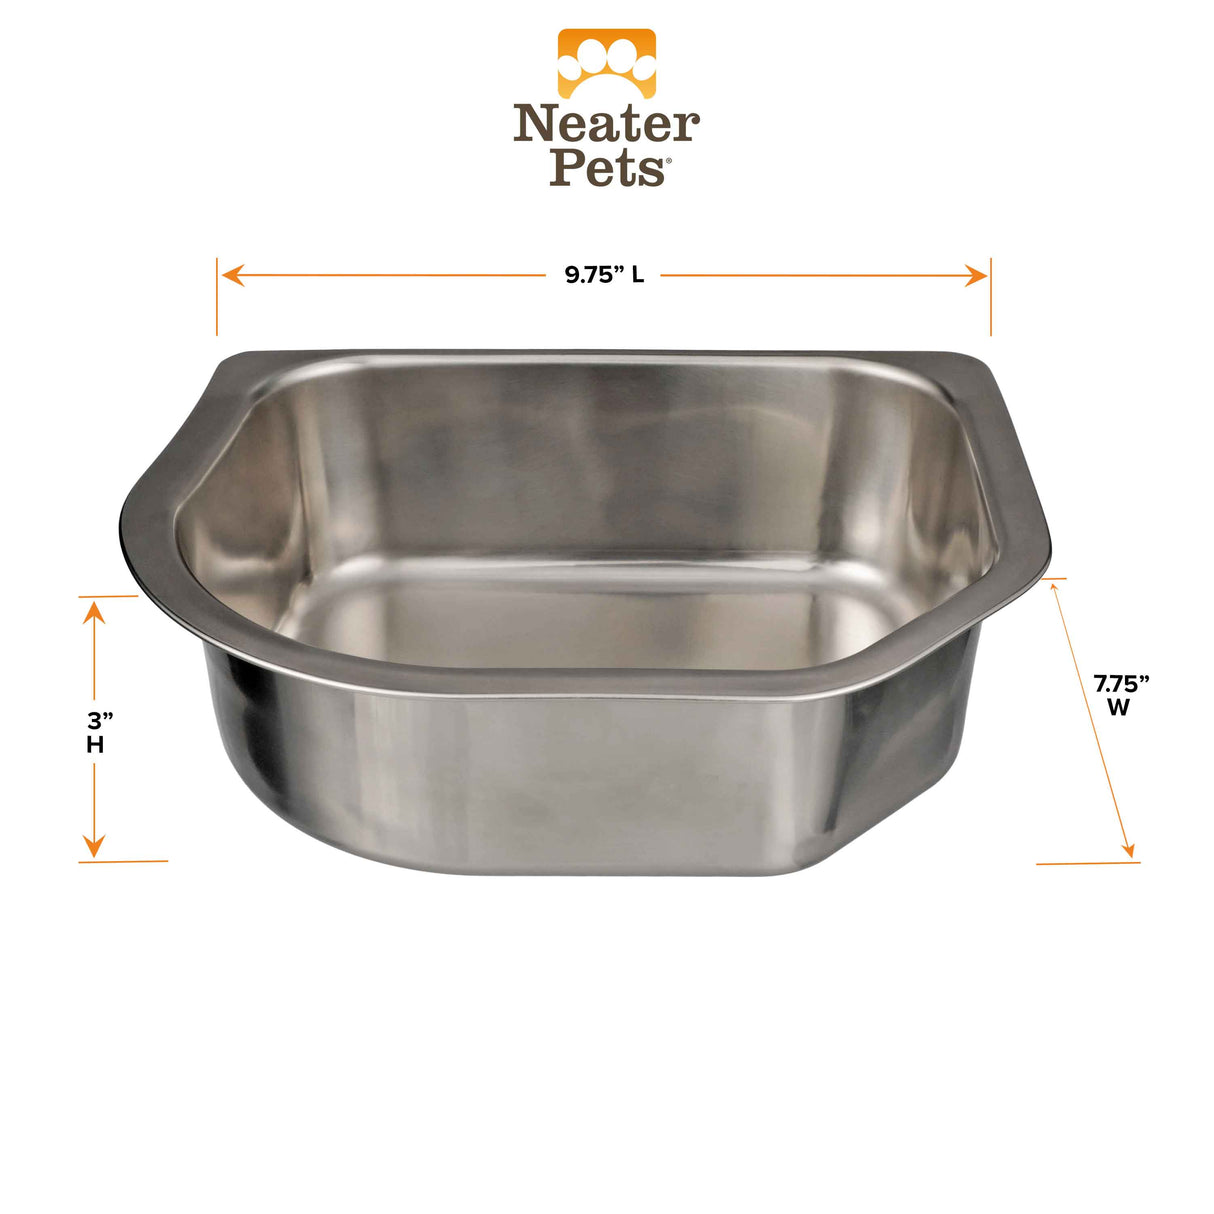 Dimensions of the Neater Slow Feeder Double Diner Stainless Steel Insert Bowl: 9.75 inches in length, 7.75 inches in width, 3 inches in height